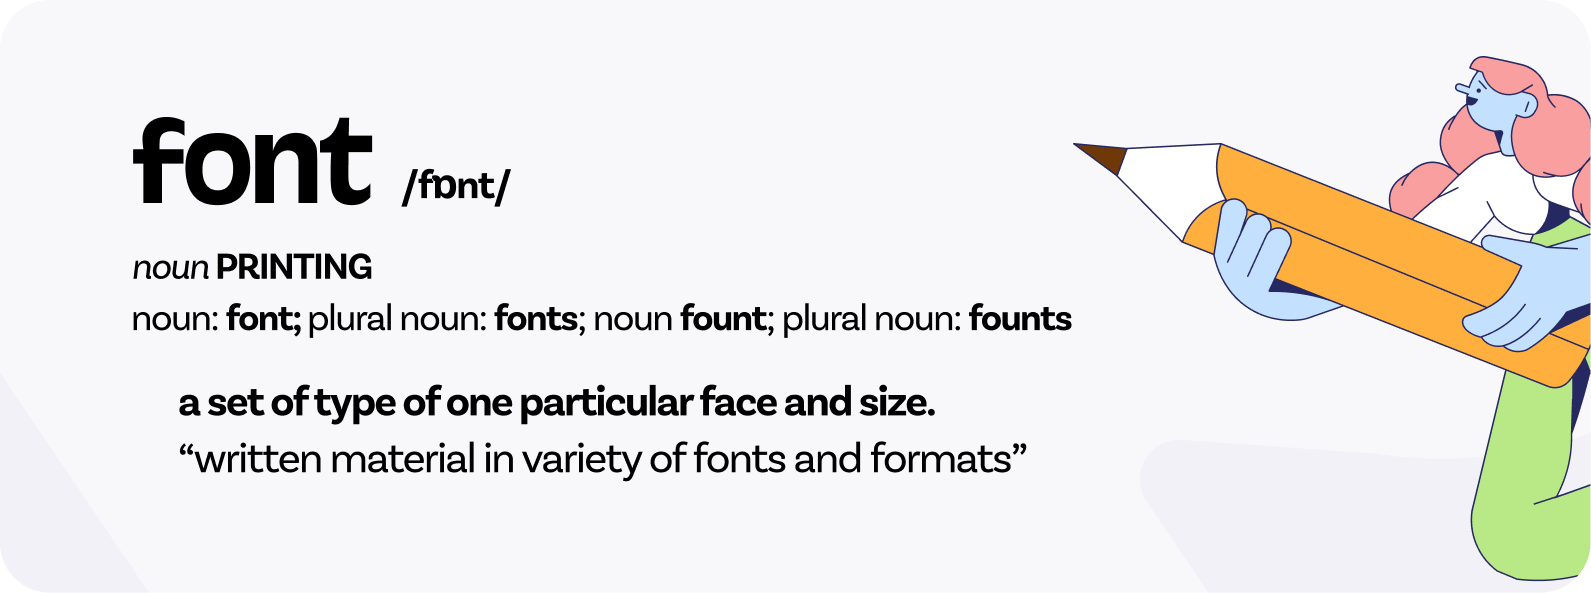 Definition of font.